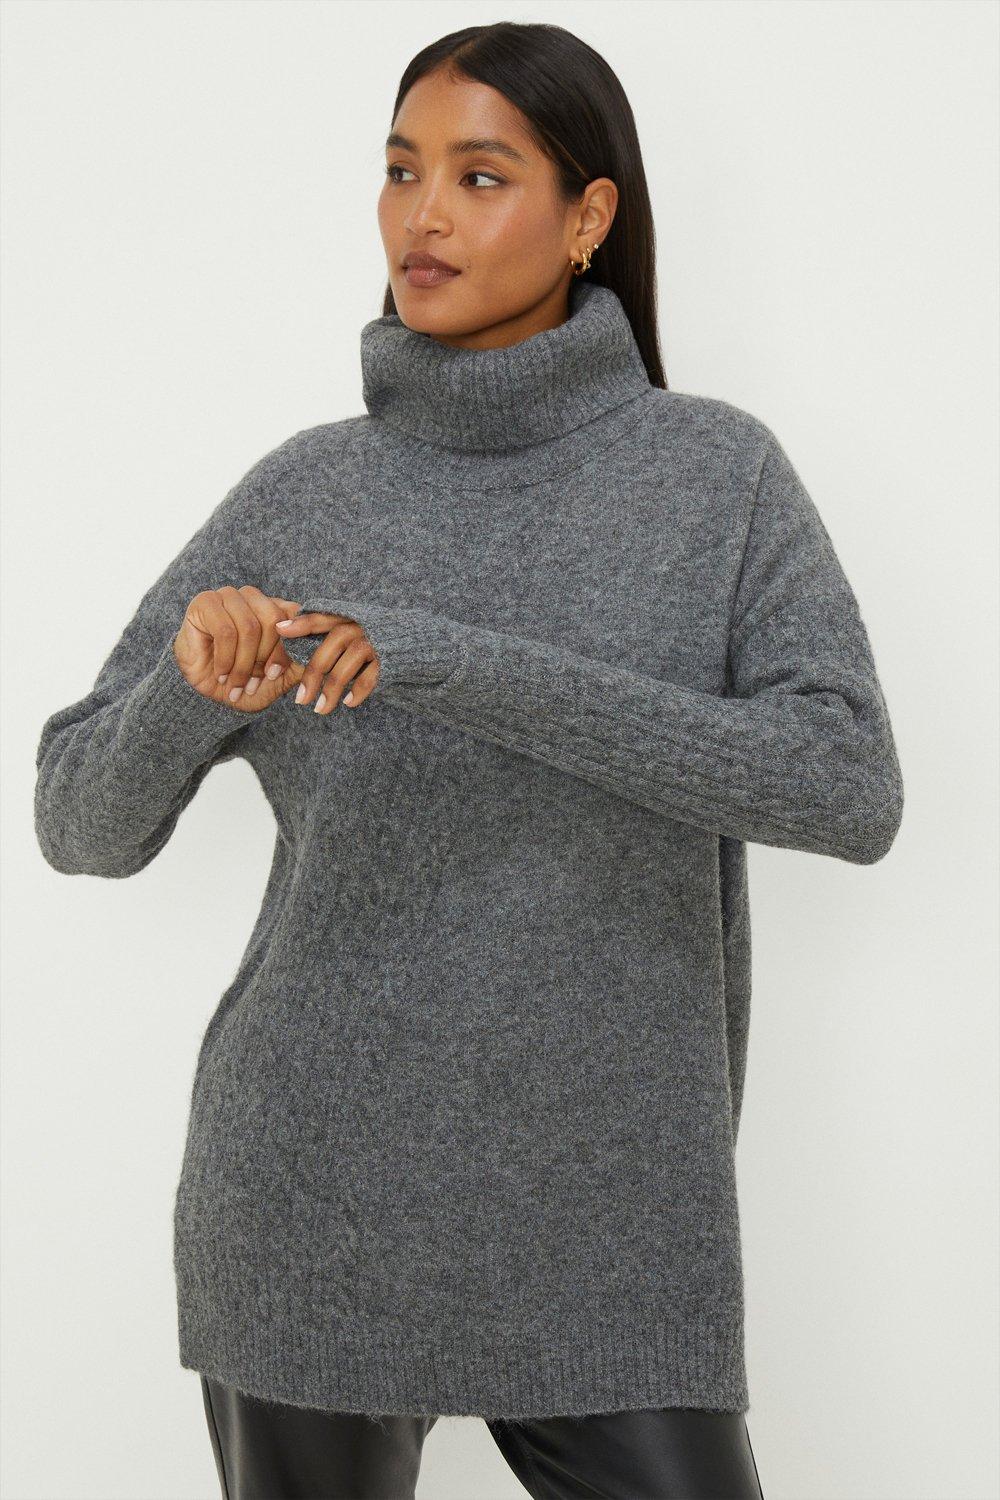 Women’s Longline Angle Cable Jumper - grey marl - XL